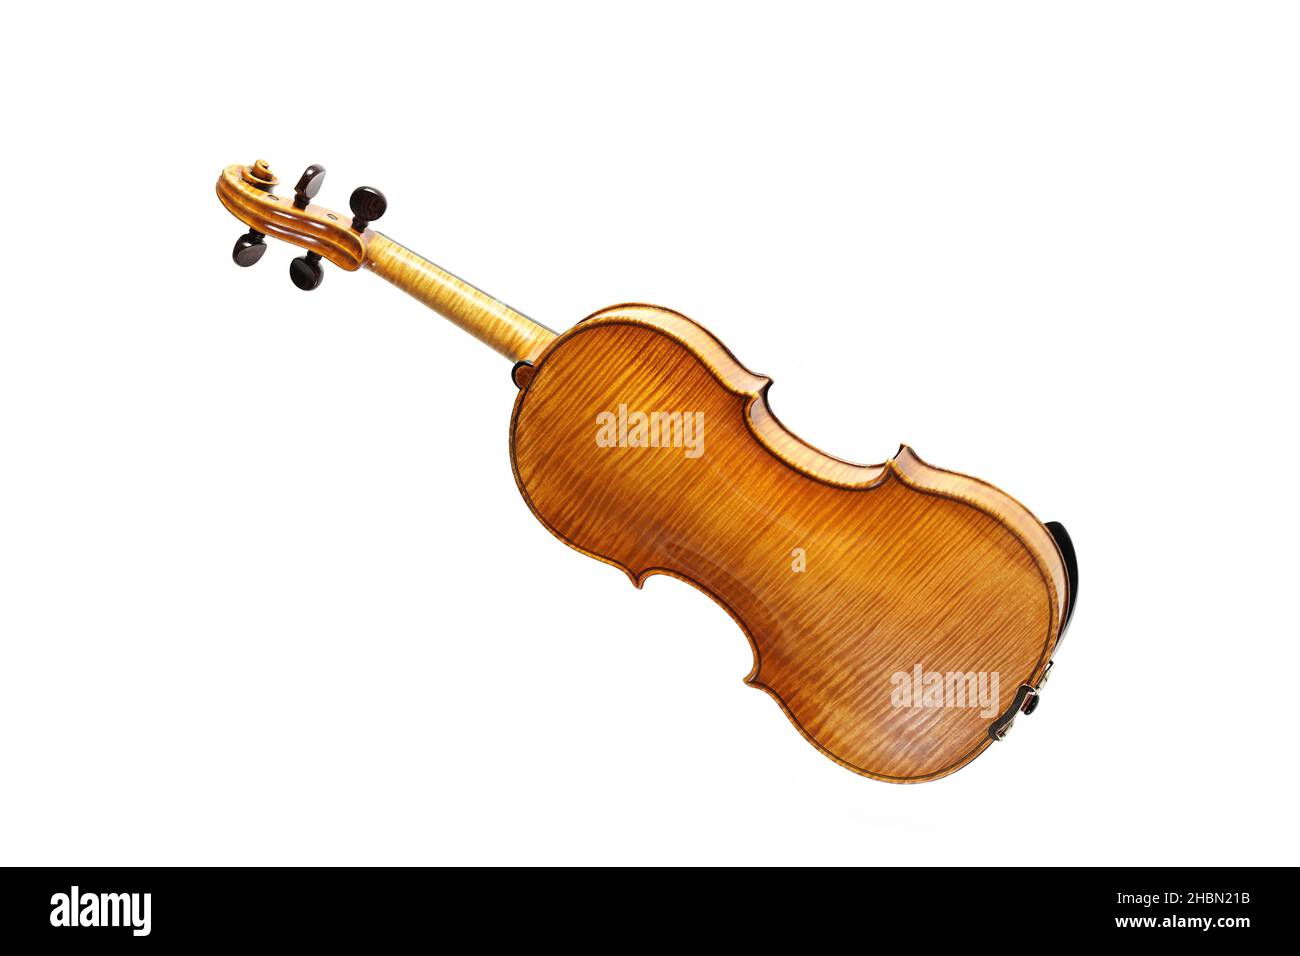 Violin from behind showing the wood grain, also called fiddle, stringed musical instrument from the viol family, isolated on a white background, copy Stock Photo